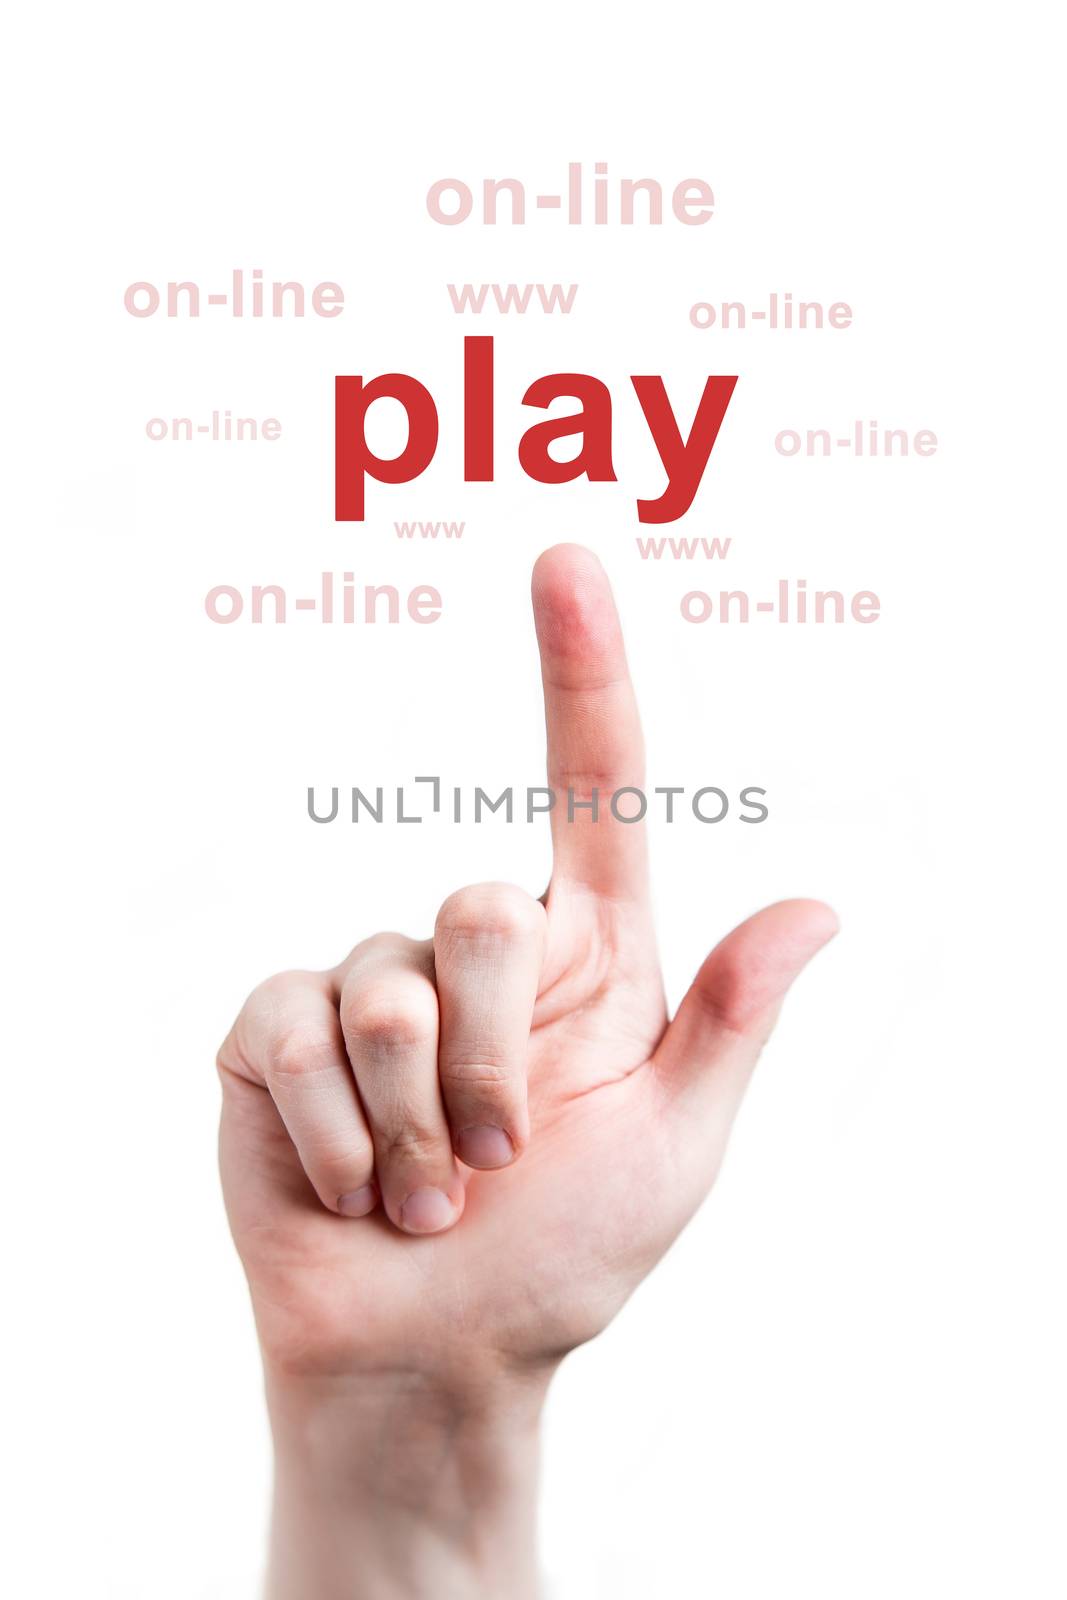 Finger clicks word play online by MichalLudwiczak